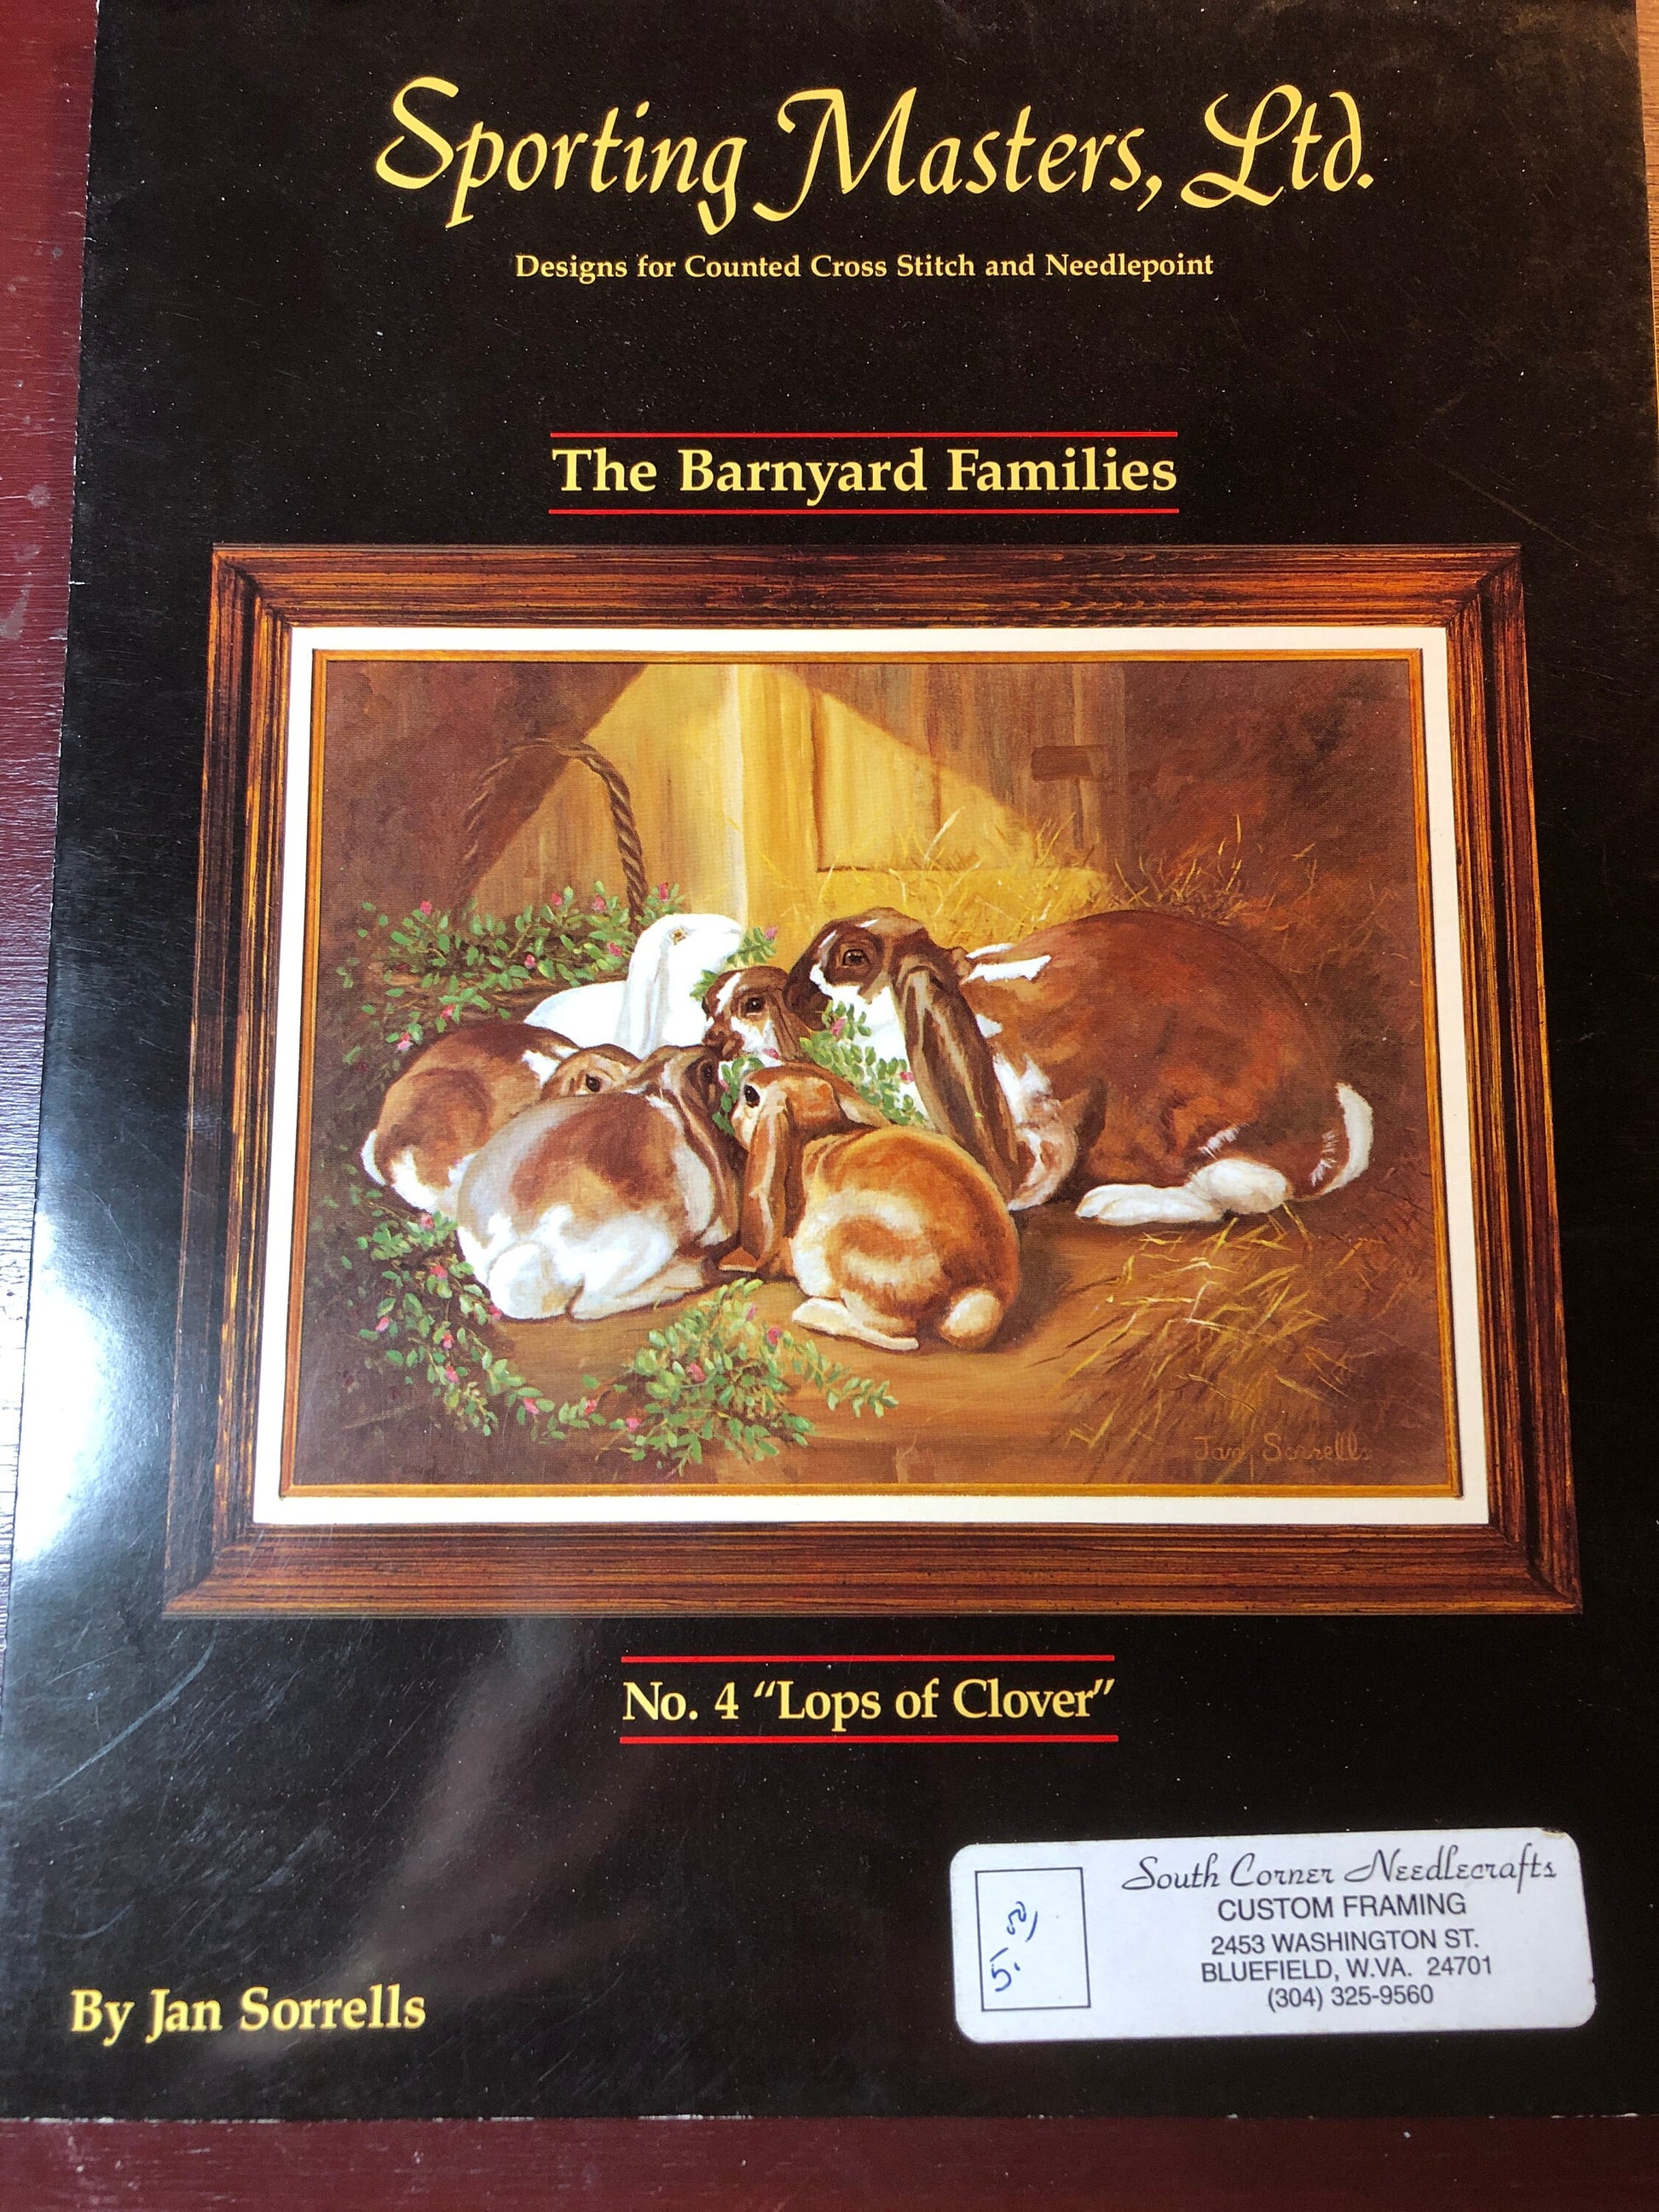 Sporting Masters Ltd., The Barnyard Families, No 4 Lops of Clover*